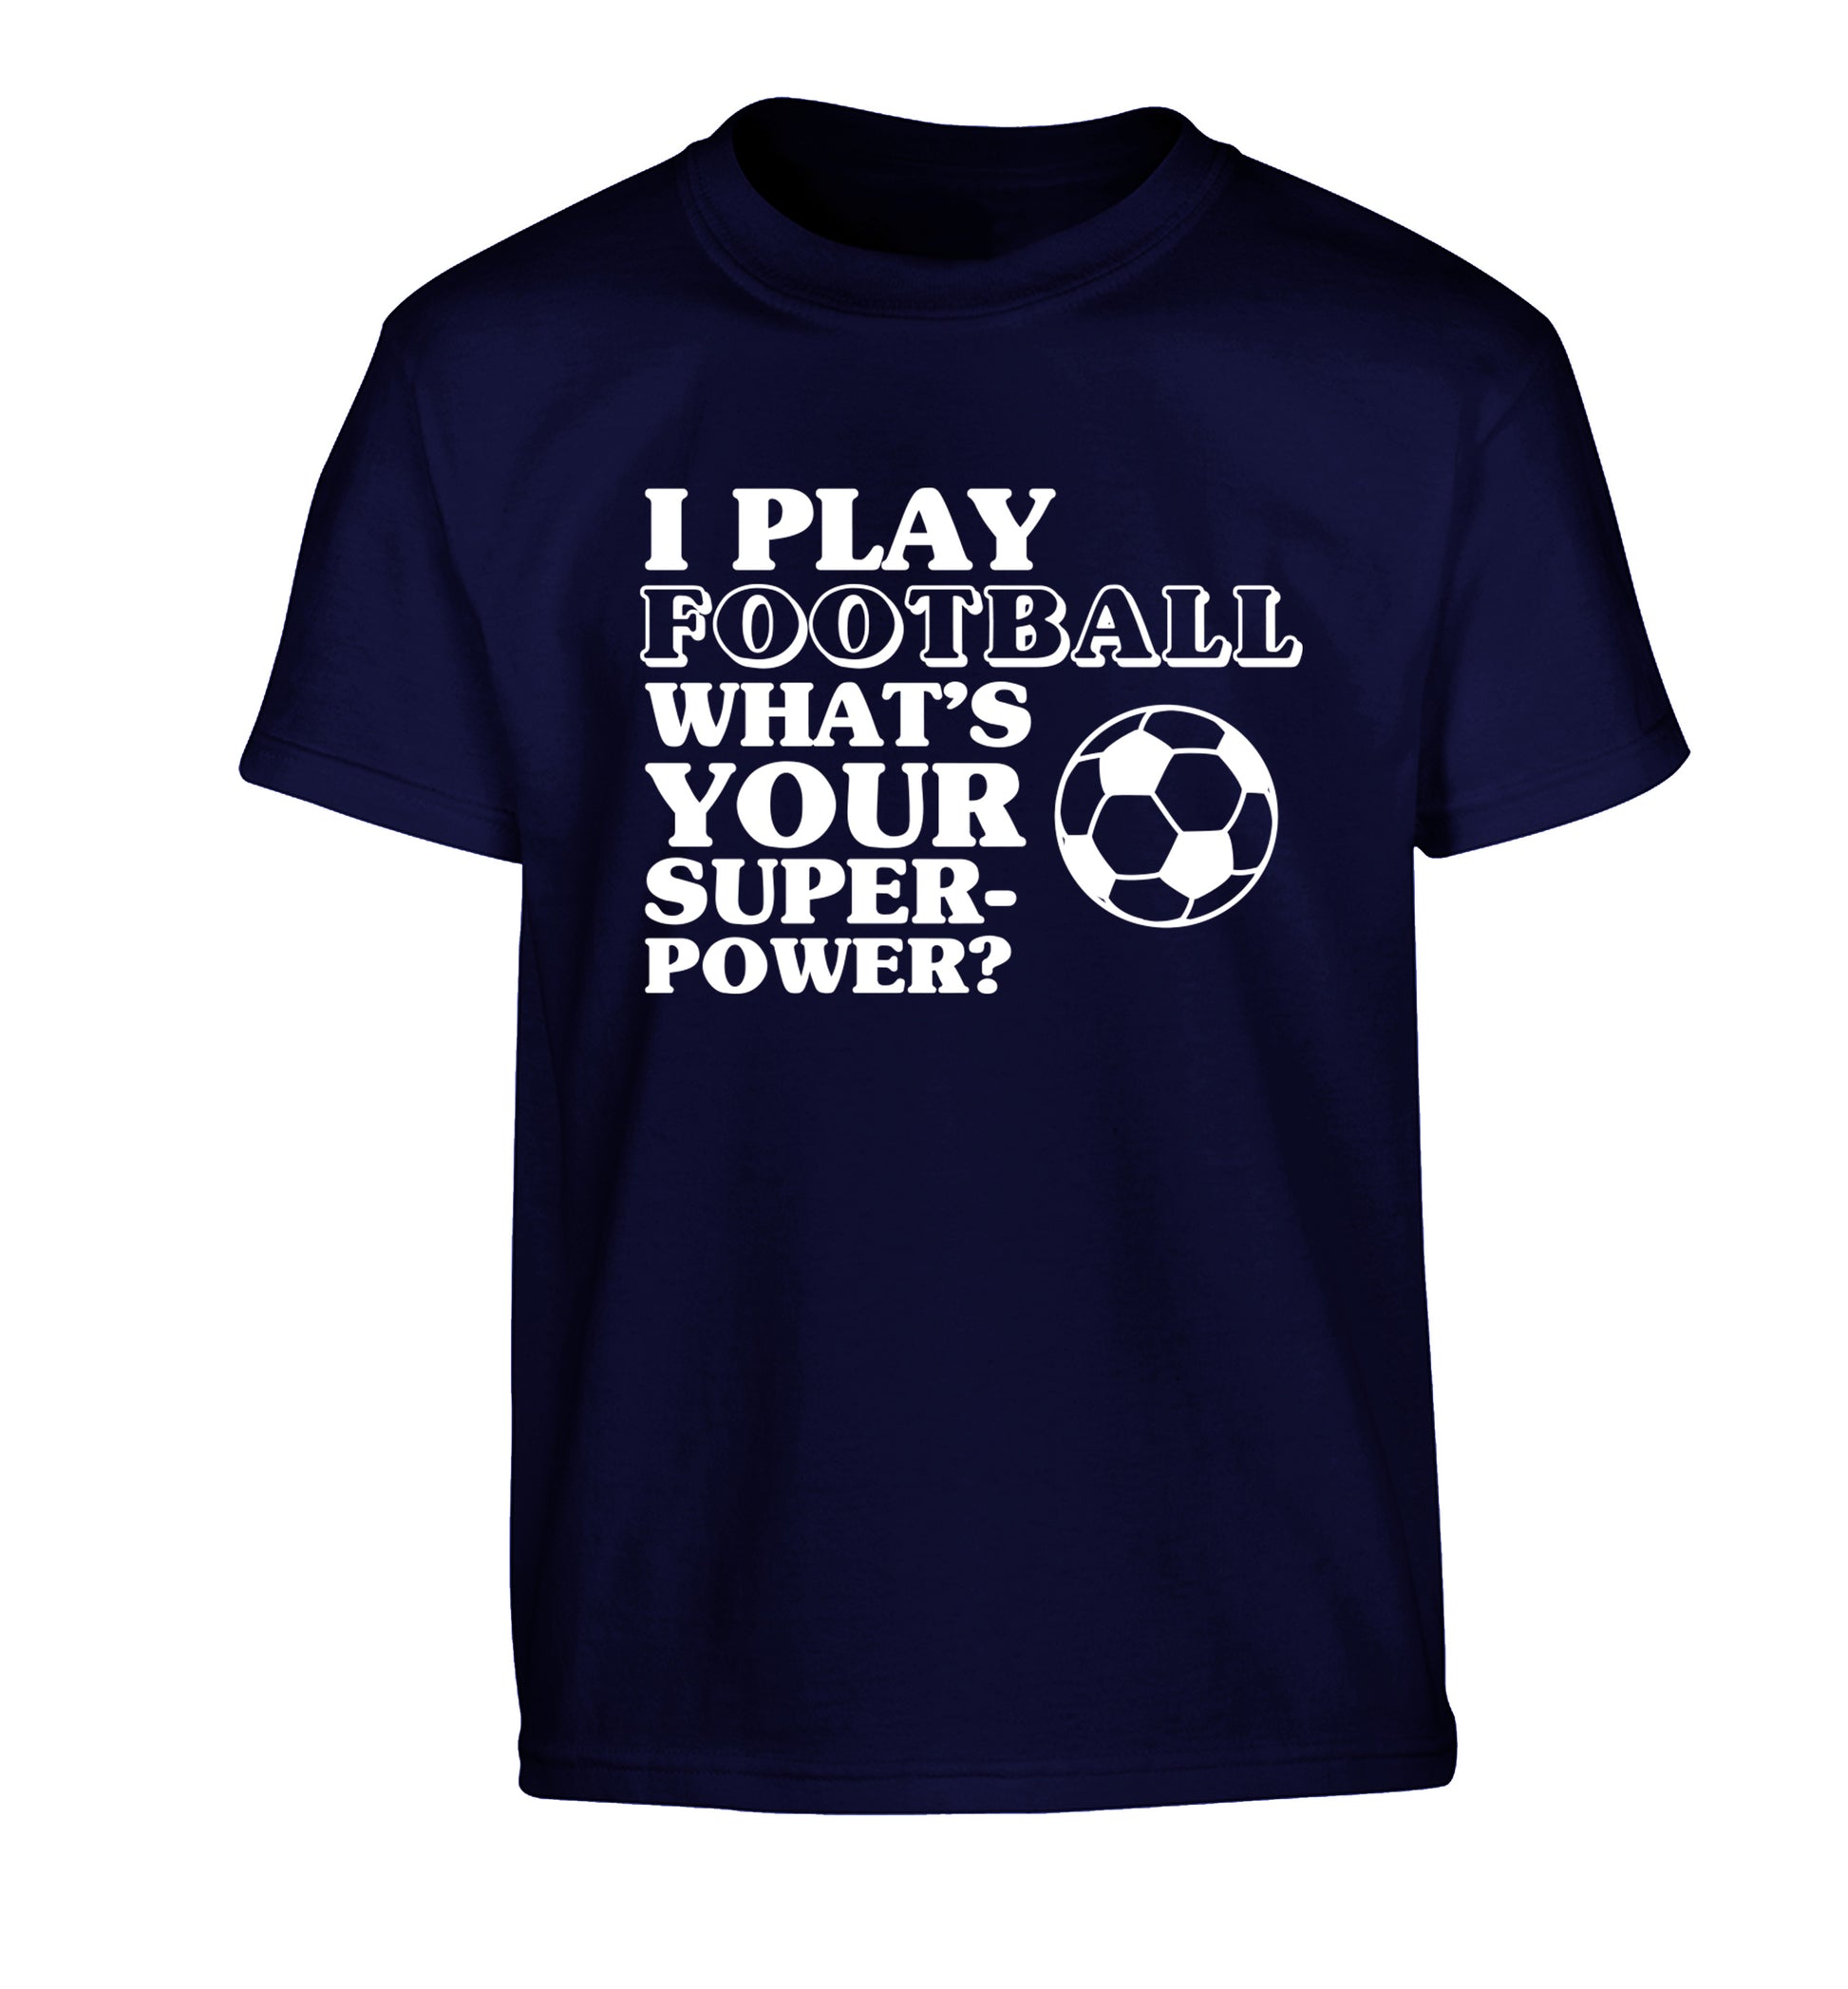 I play football what's your superpower? Children's navy Tshirt 12-14 Years